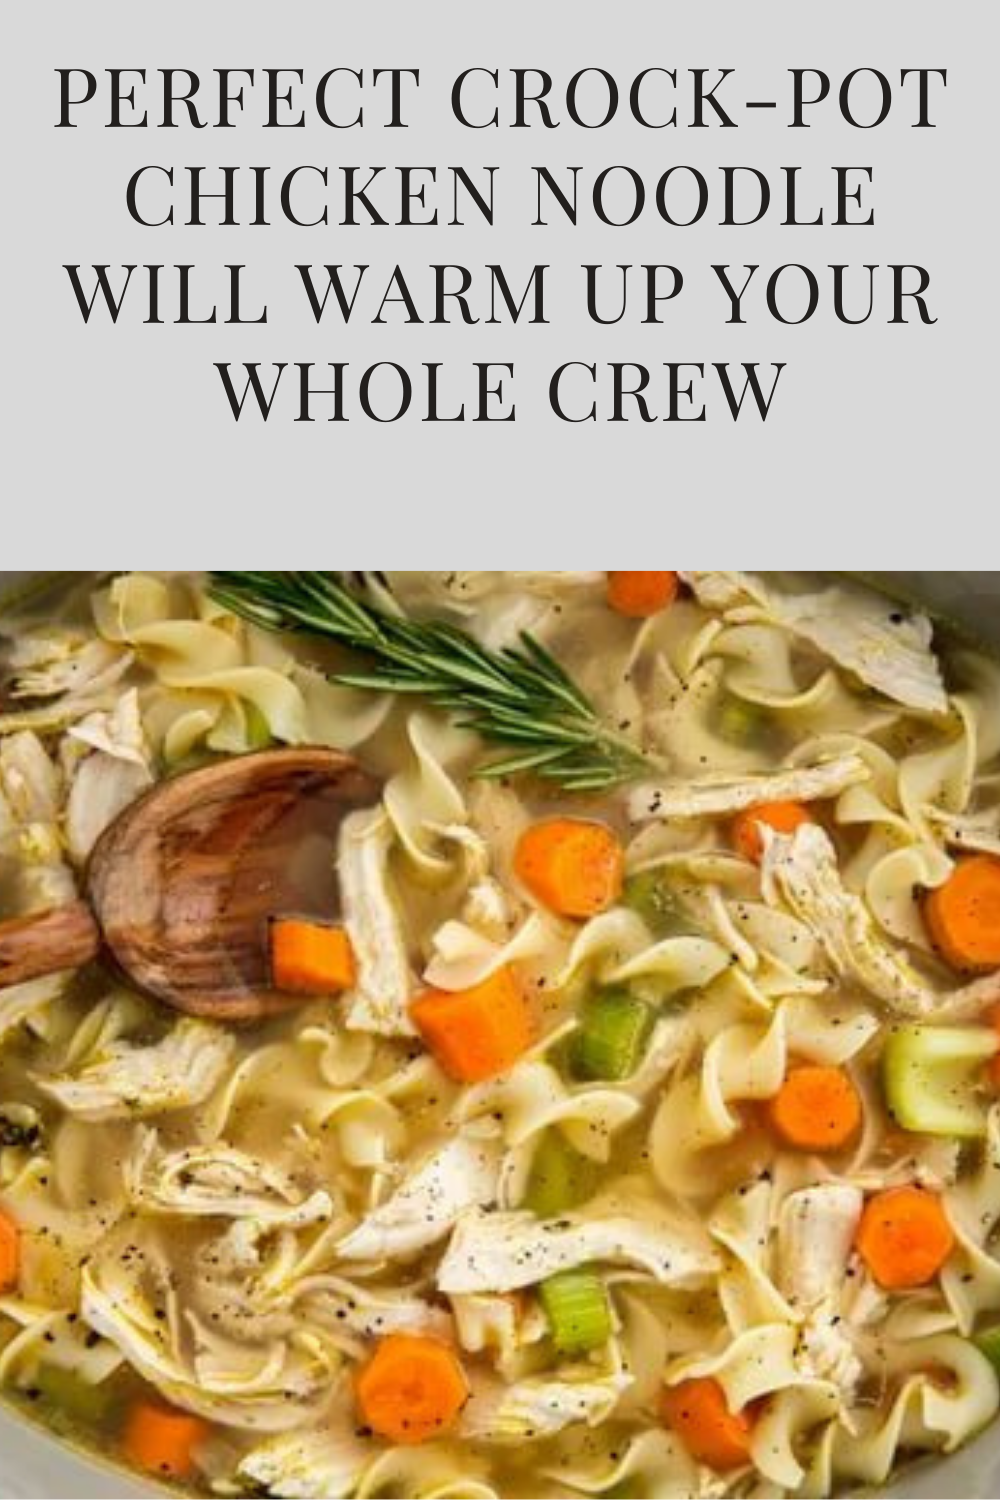 Perfect Crock-Pot Chicken Noodle Will Warm Up Your Whole Crew